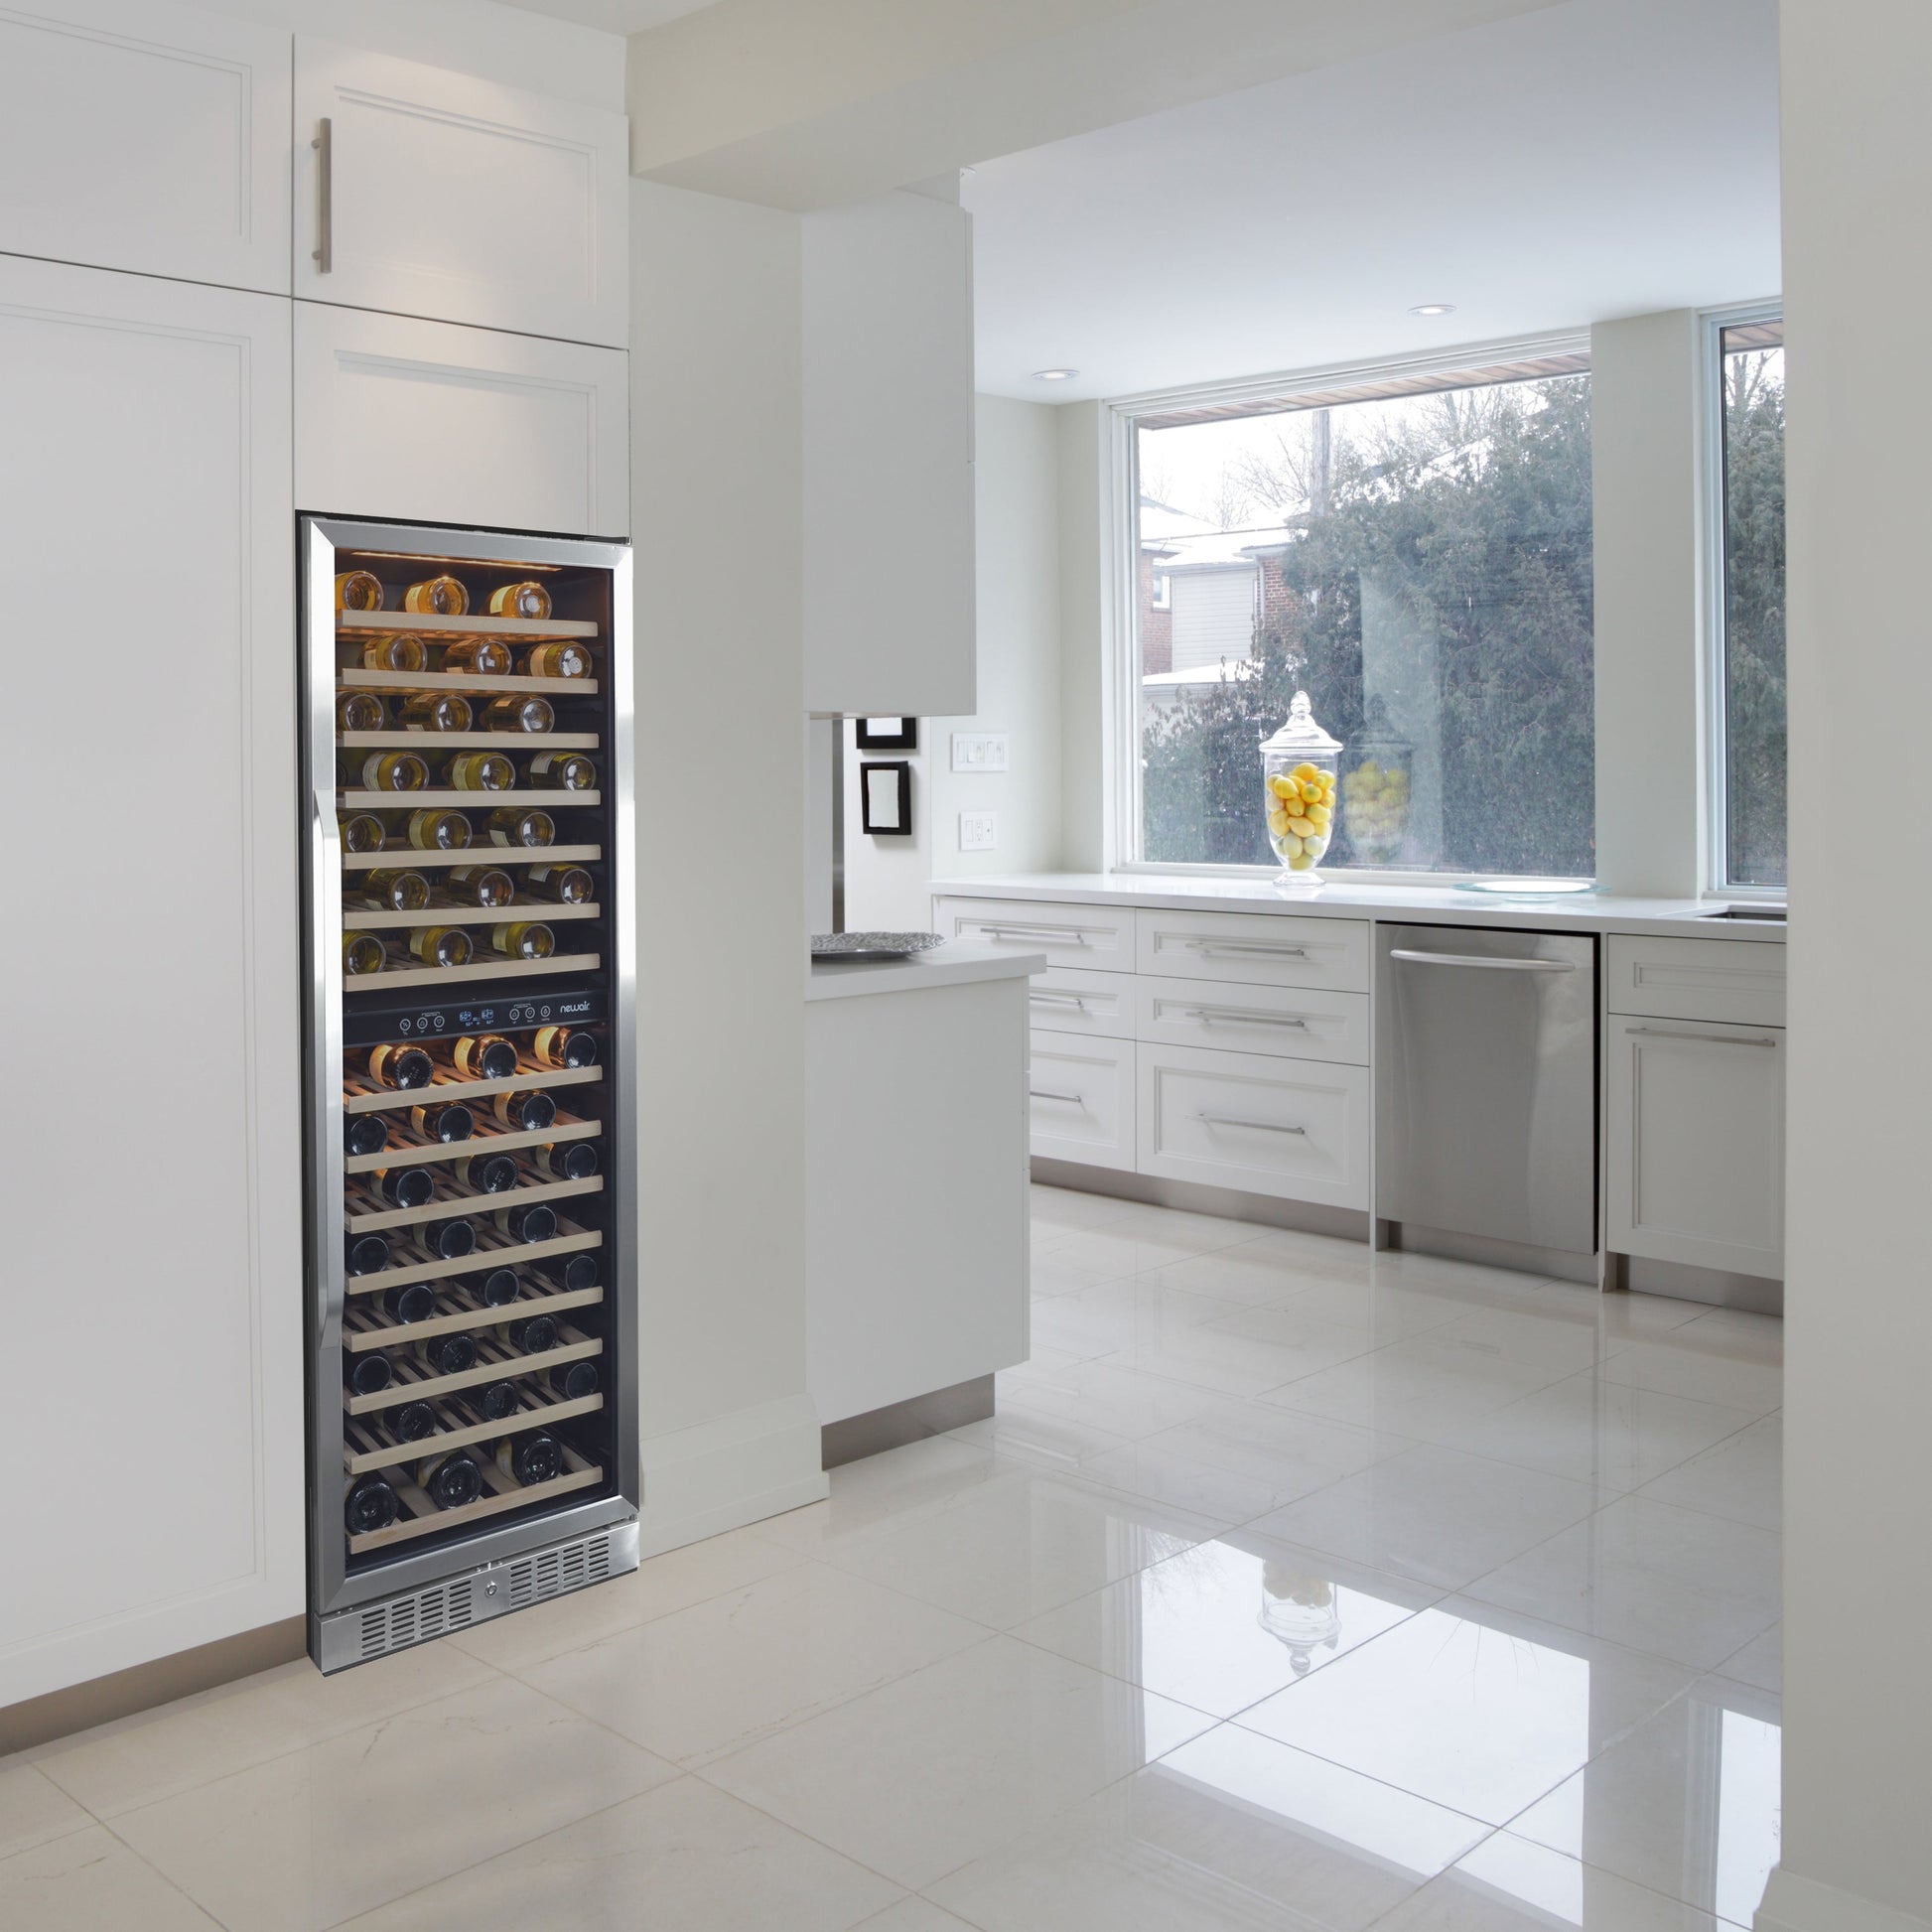 Newair 24” Built-in 160 Bottle Dual Zone Compressor Wine Fridge in Stainless Steel, Quiet Operation with Smooth Rolling Shelves